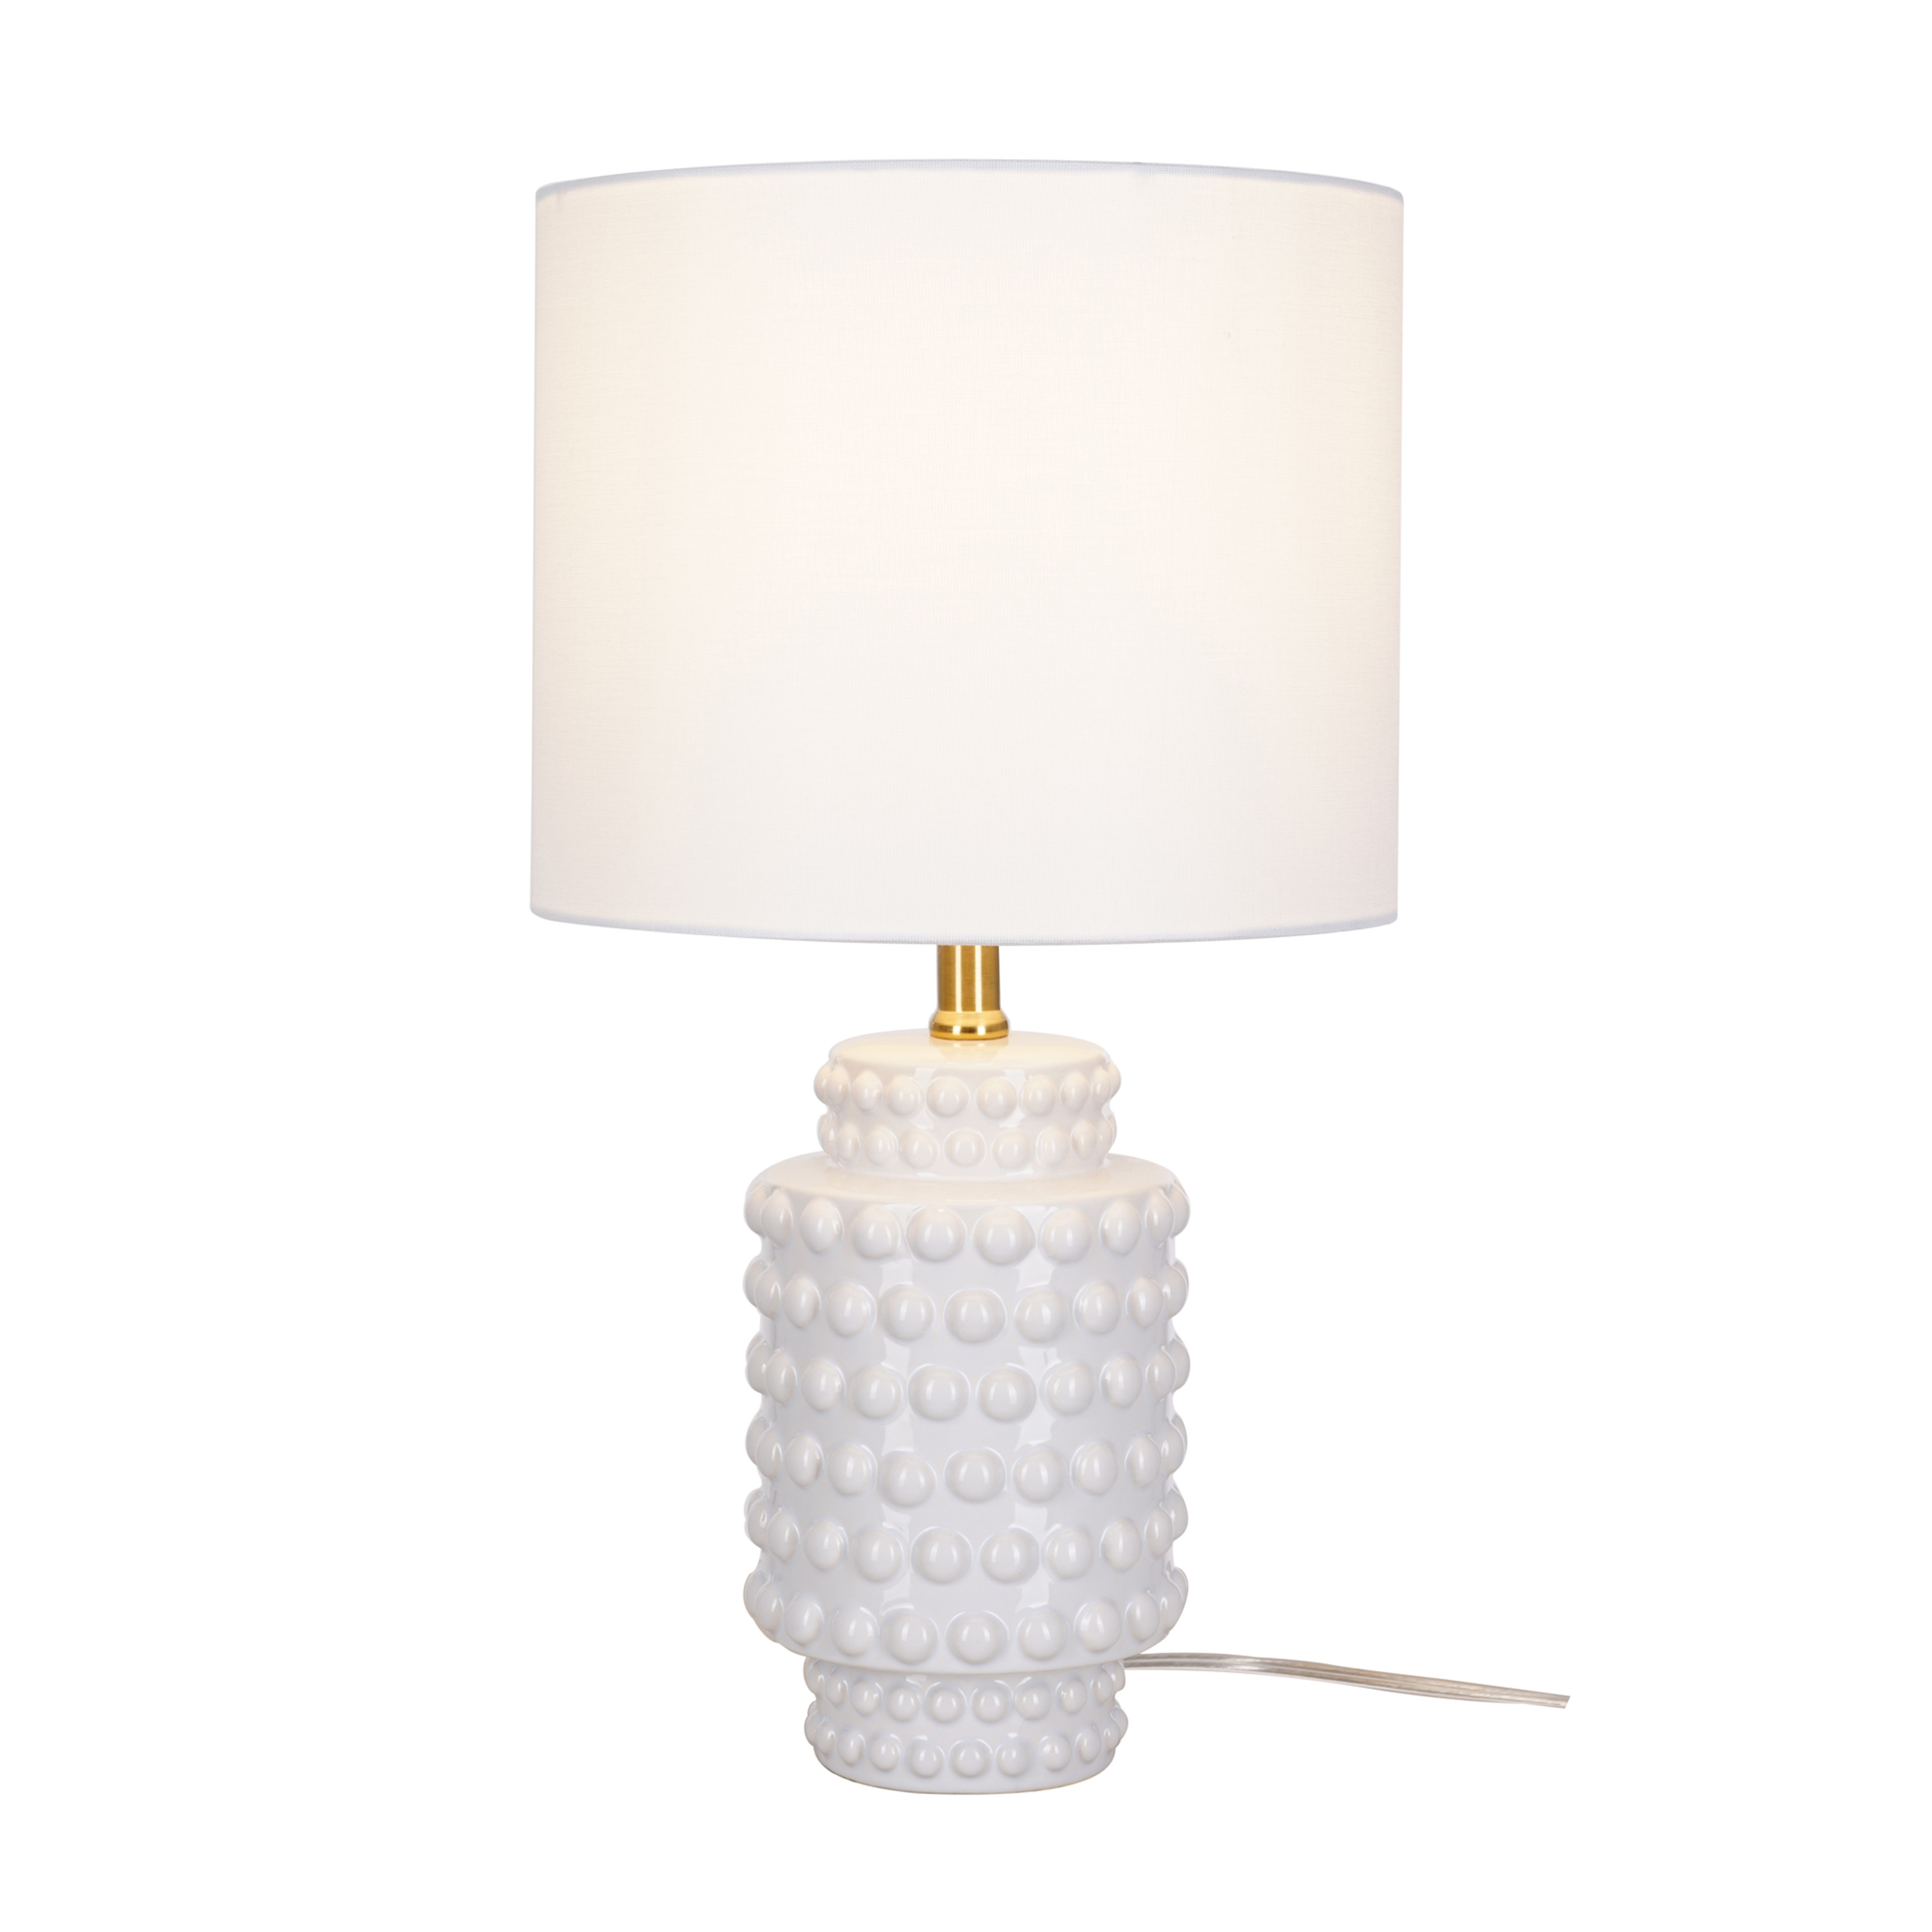 My Texas House 21" Hob-Nail Ceramic Table Lamp, Brass Accents, White Finish - image 5 of 8